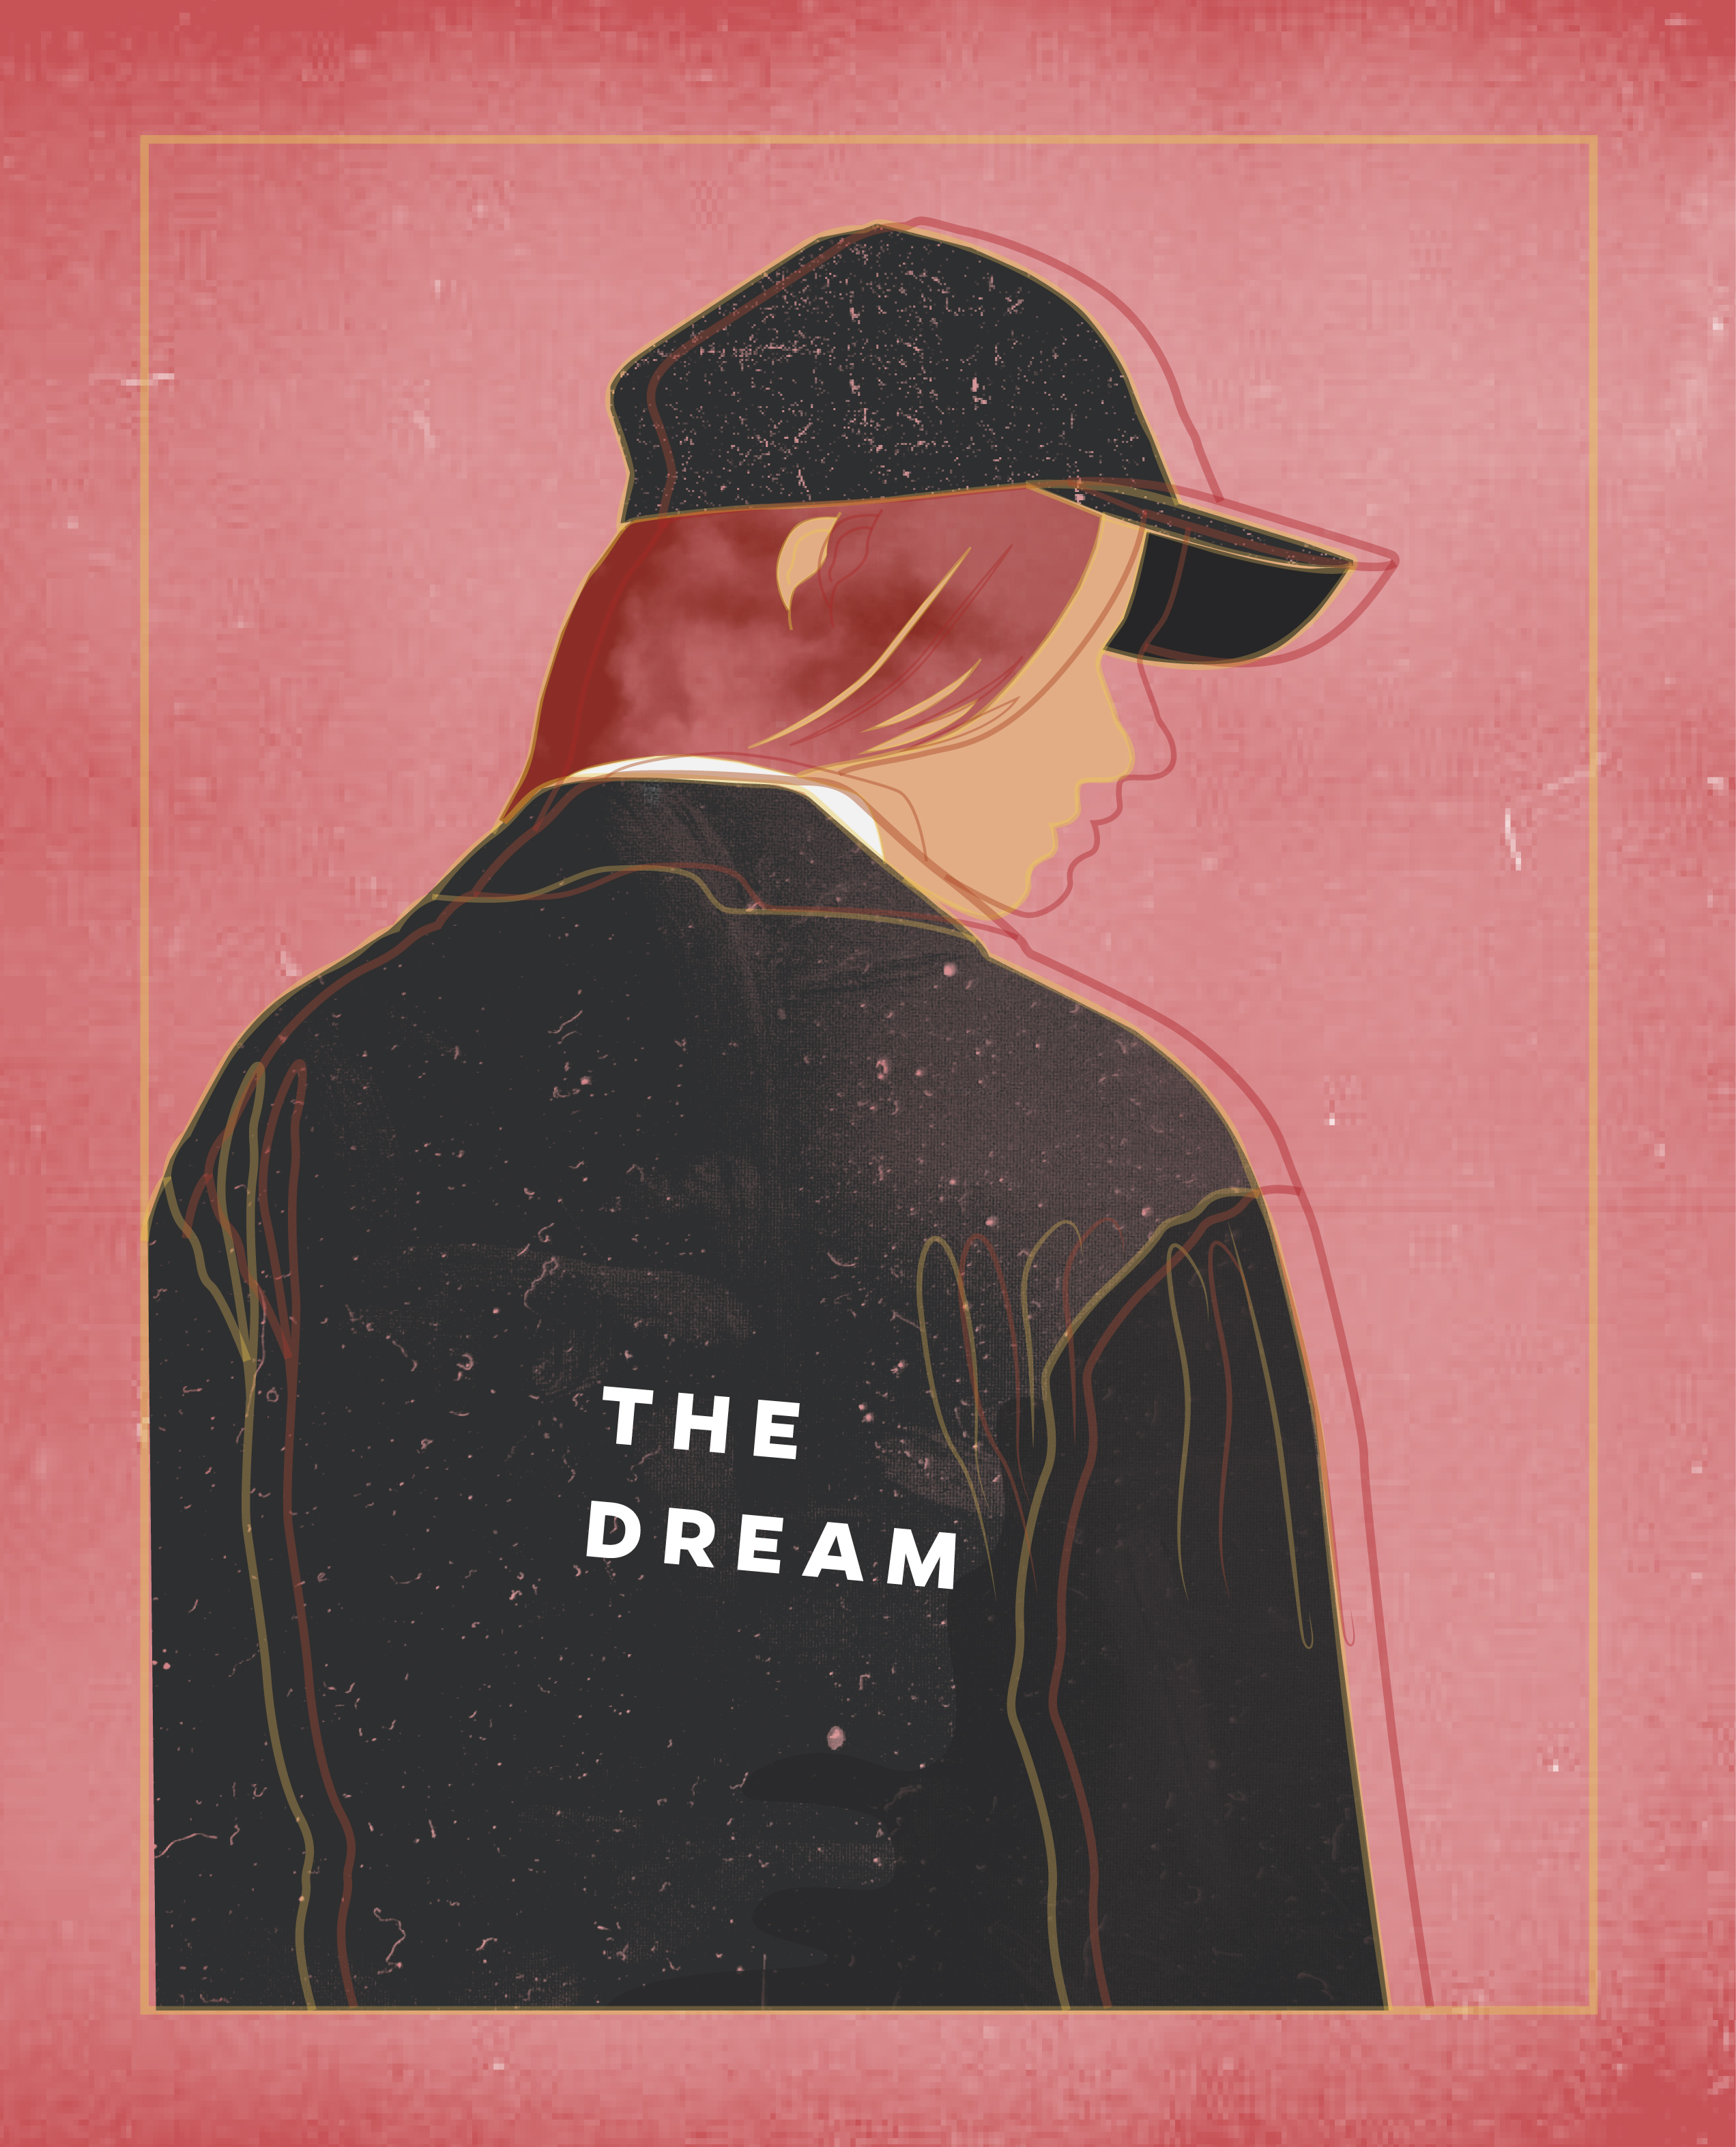 thedream-01.jpg